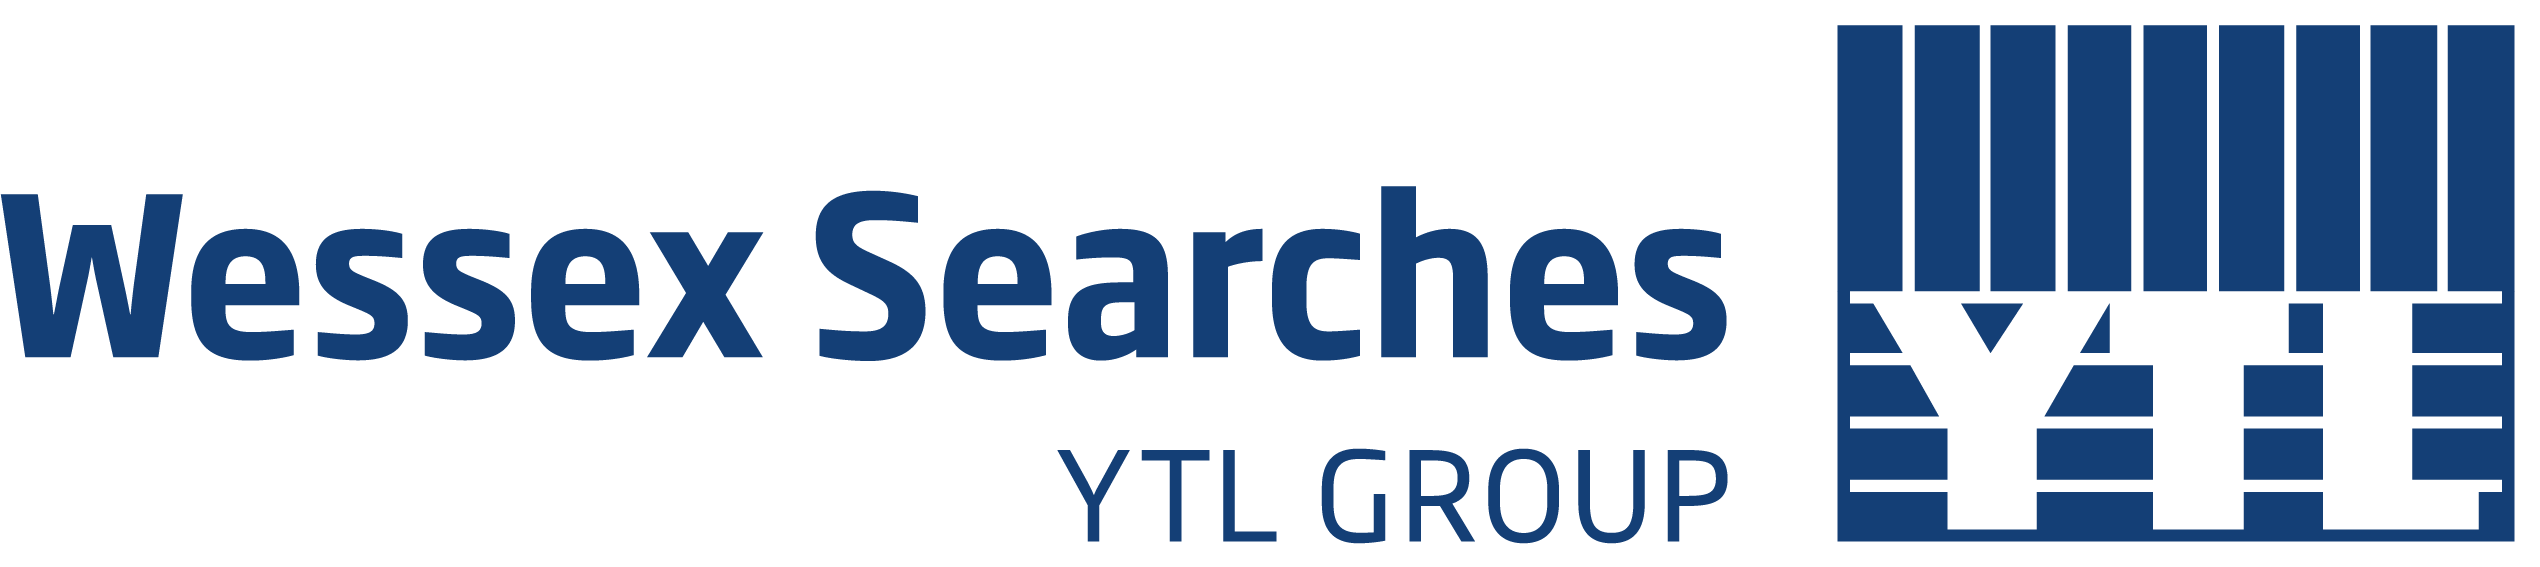 Wessex Searches, YTL Group logo